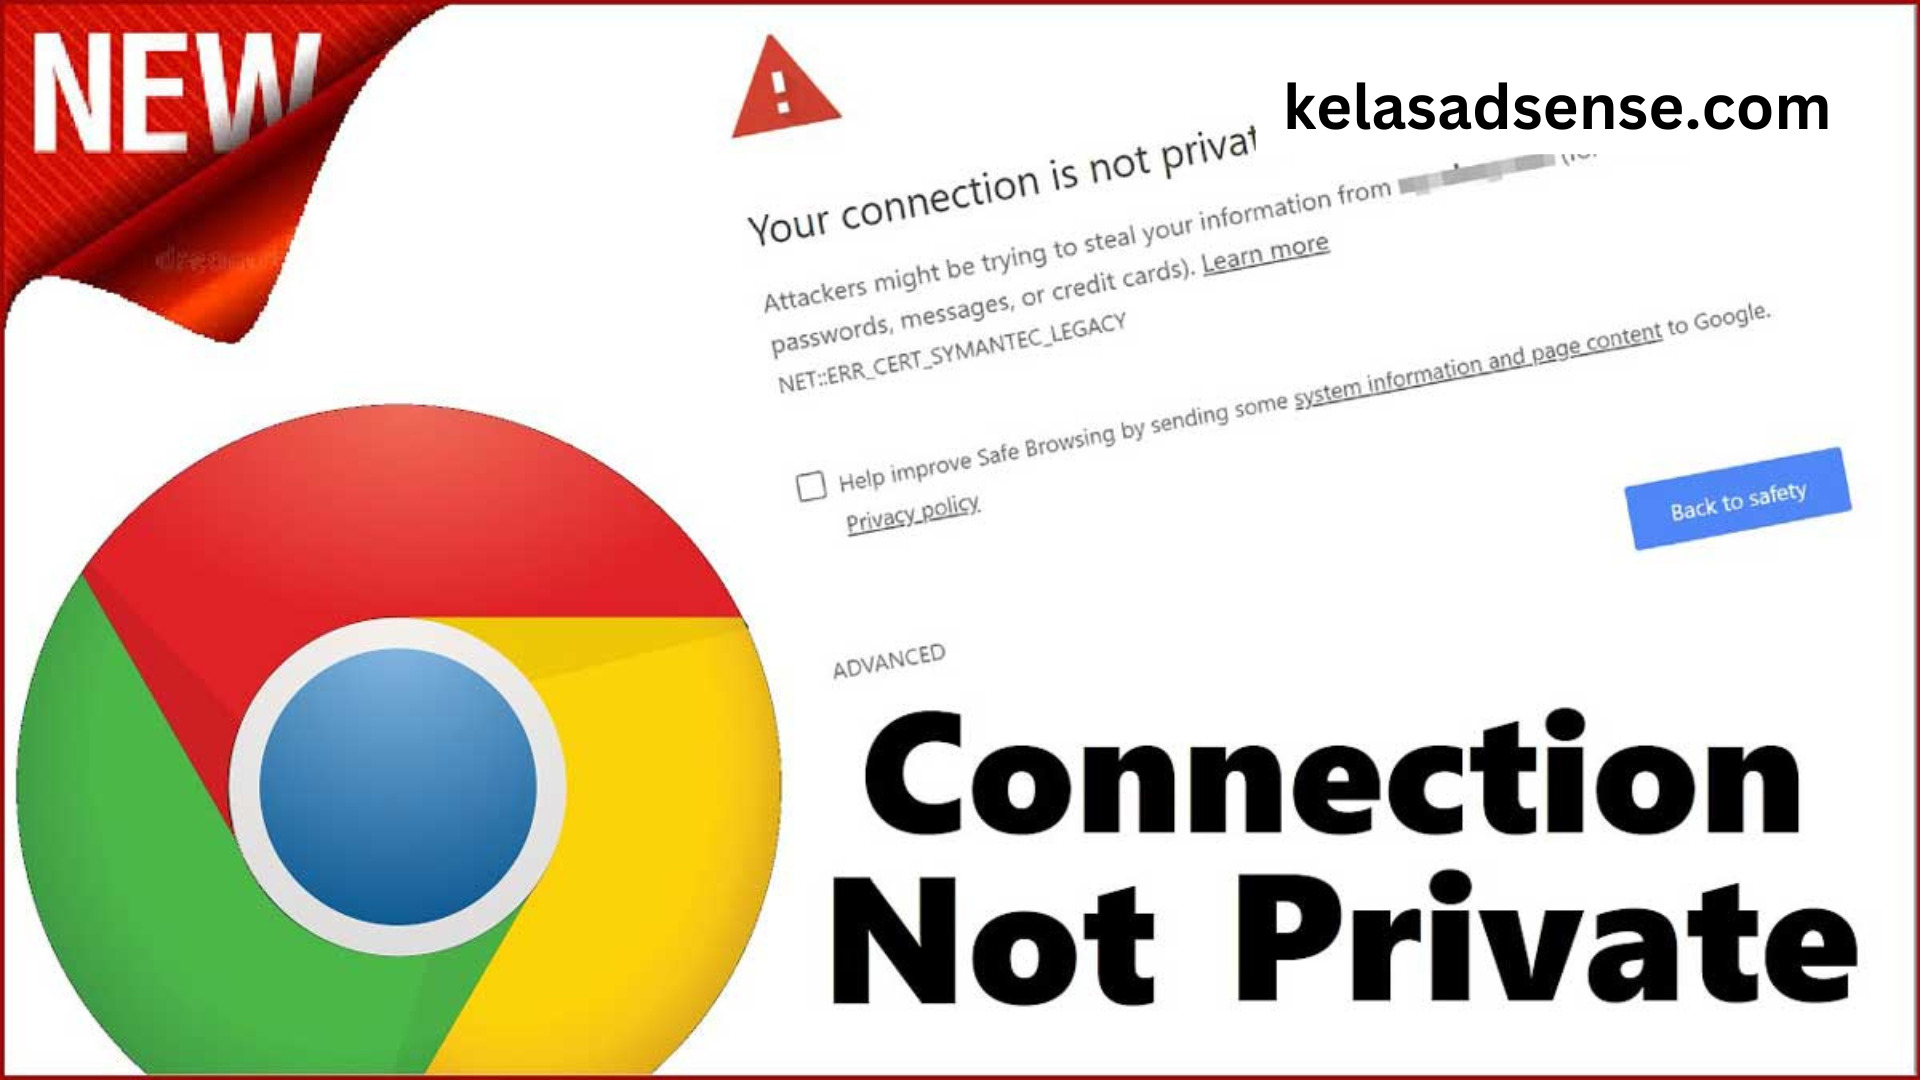 cara mengatasi your connection is not private